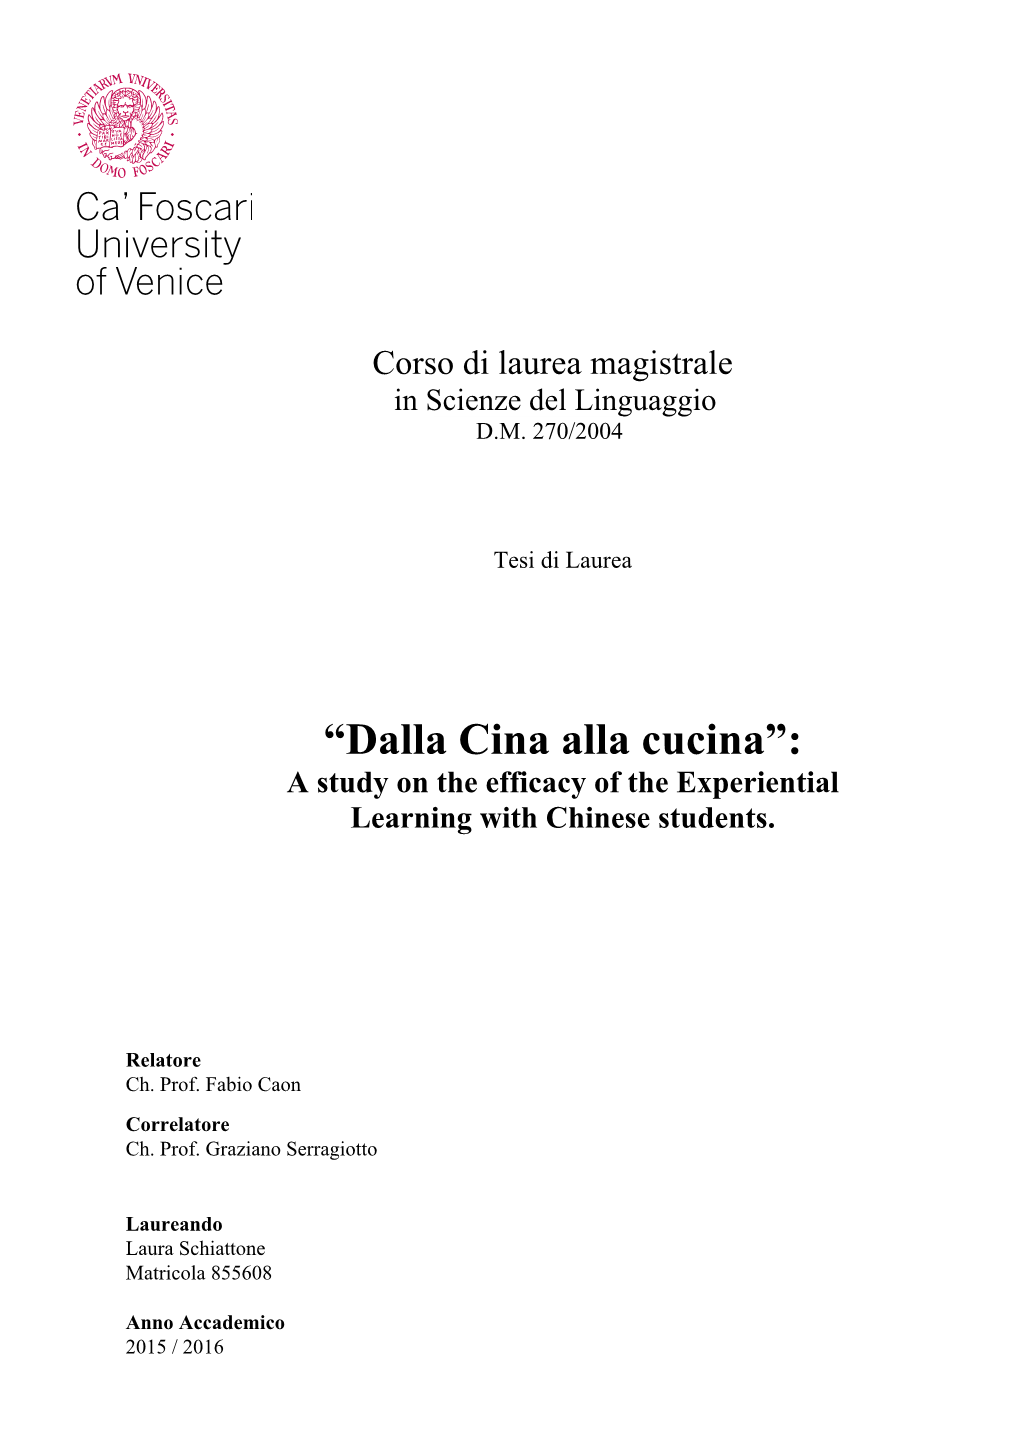 “Dalla Cina Alla Cucina”: a Study on the Efficacy of the Experiential Learning with Chinese Students